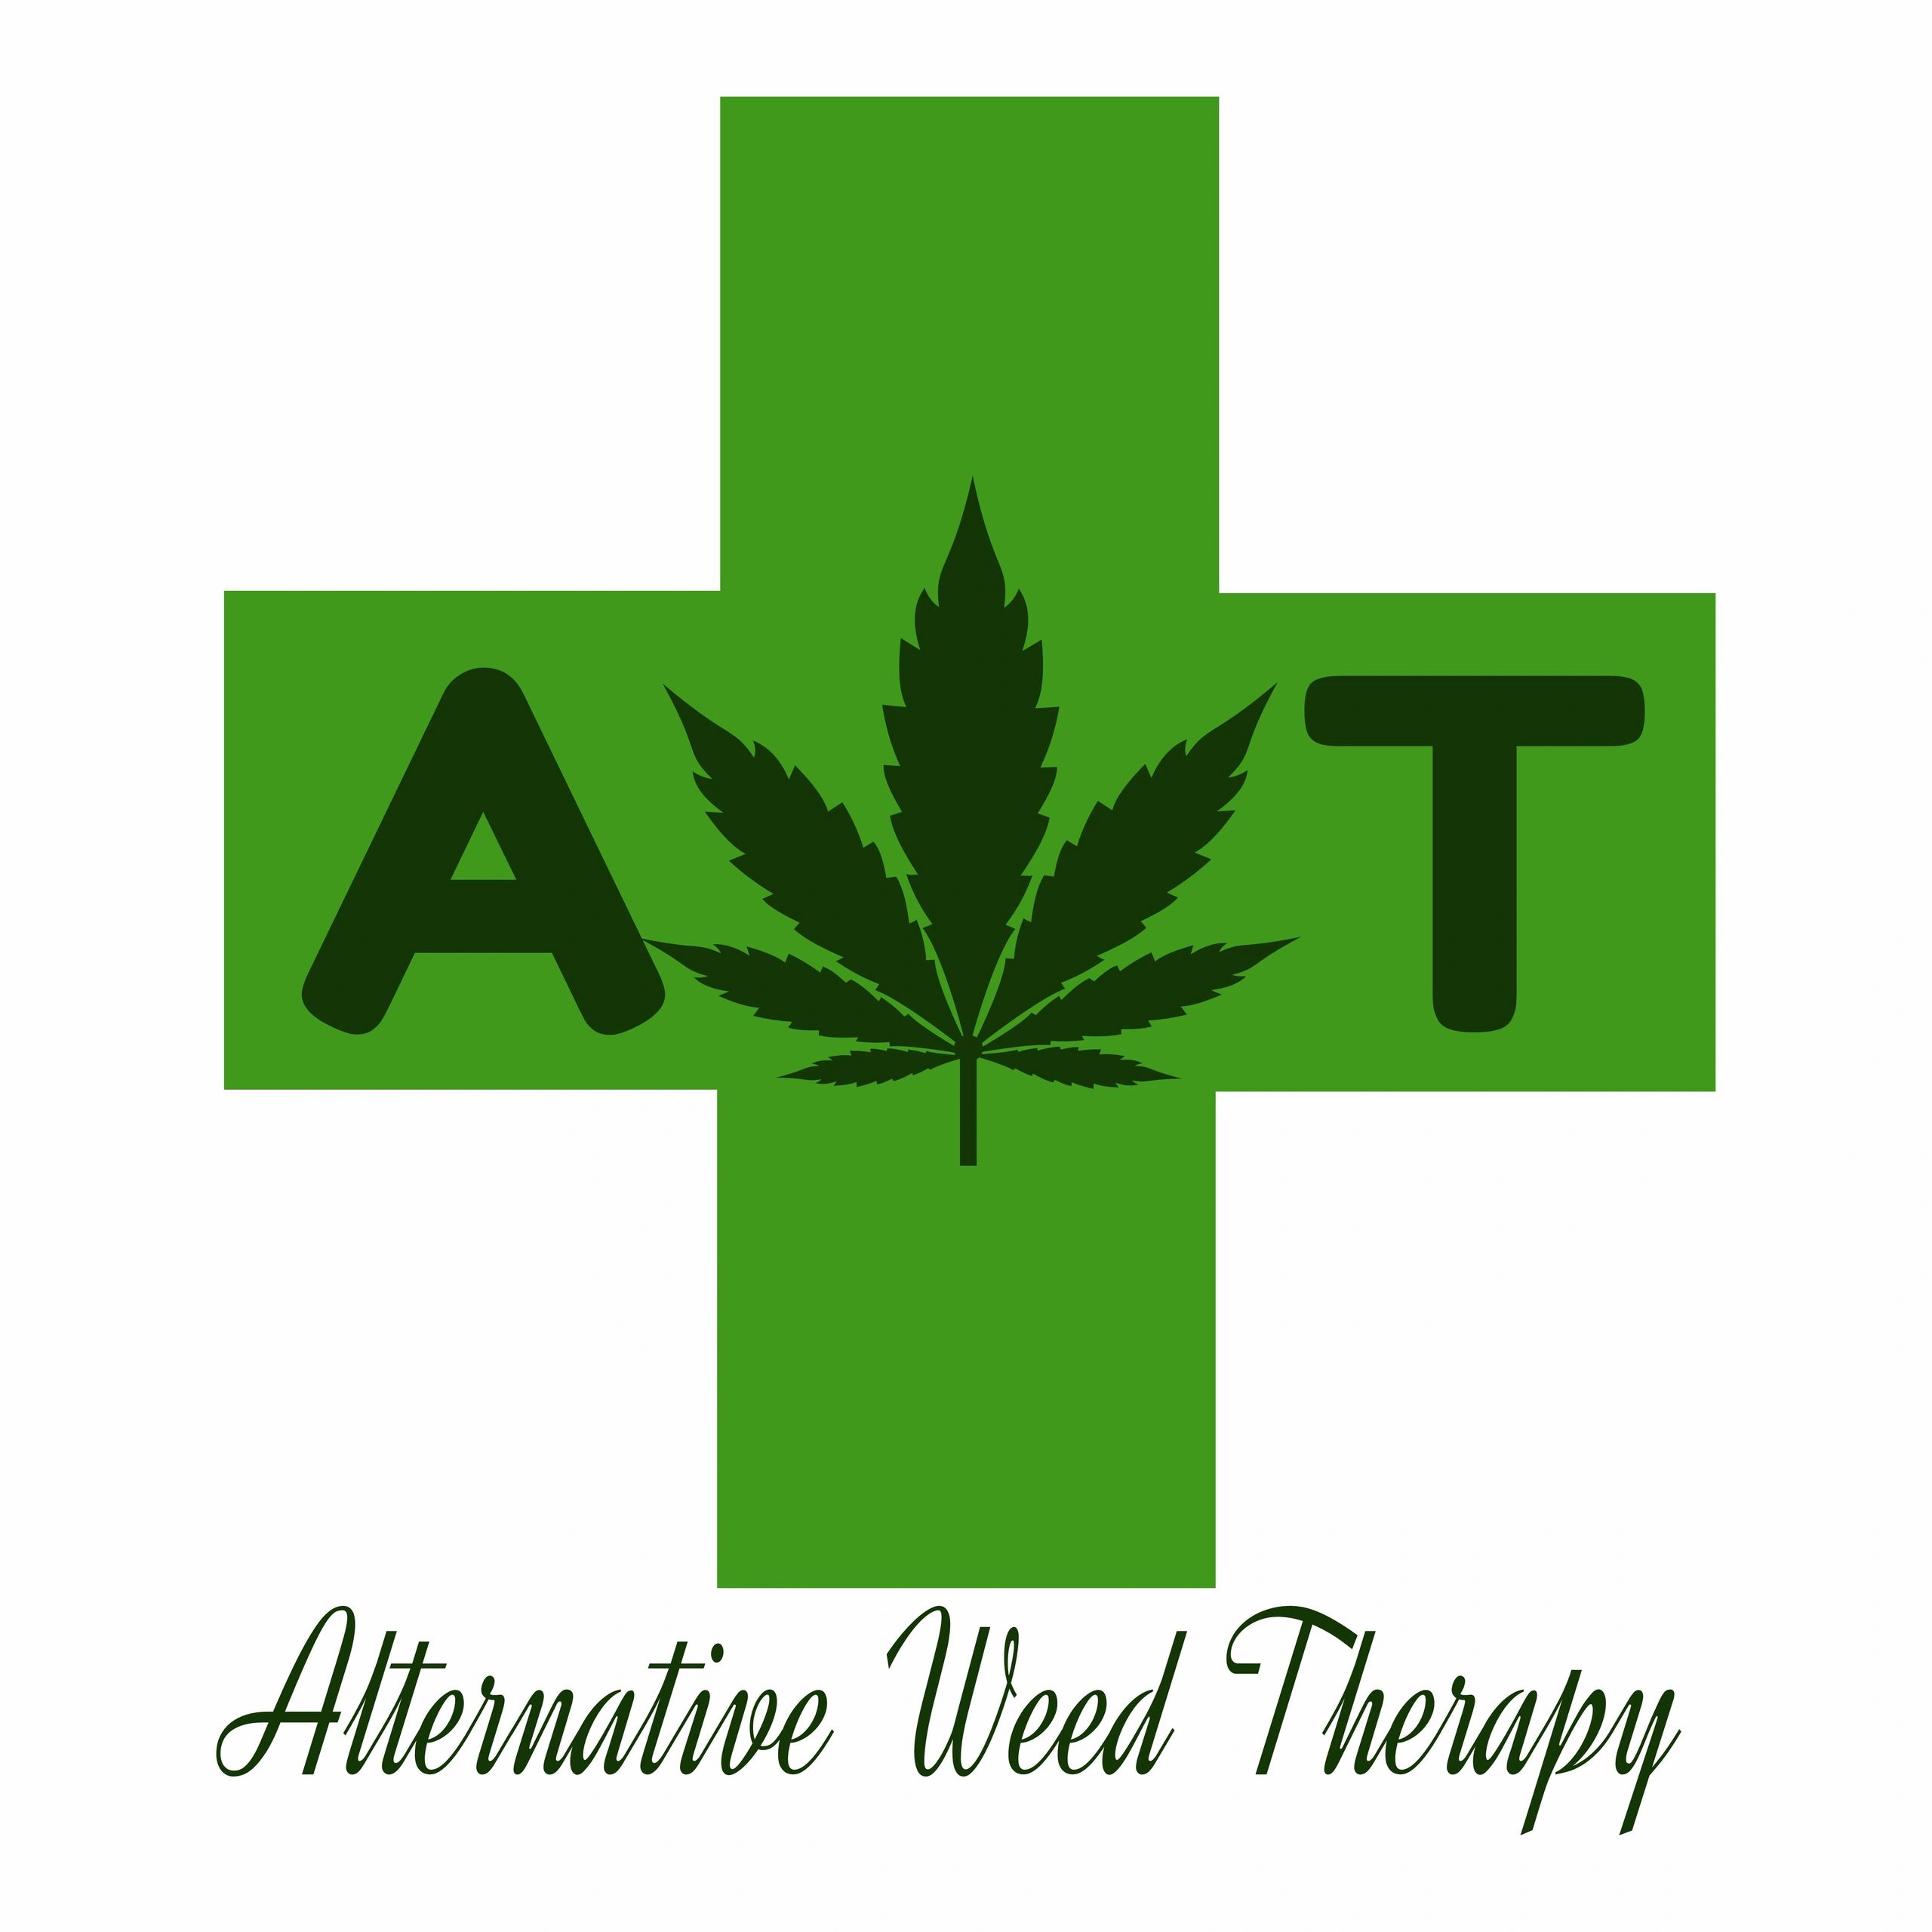 IS MEDICAL MARIJUANA CONSIDERED ALTERNATIVE MEDICINE? - Marijuana|Cannabis|Effects|Thc|People|Cbd|Weed|Plant|Alternatives|Drug|Pain|Health|Plants|Products|Lotus|Smoke|Cannabinoids|Tea|Alternative|Time|Cultures|Research|Way|World|Substitute|Drugs|States|Inflammation|Effect|List|Symptoms|Years|Damiana|Patients|Body|Substitutes|Quality|Brain|Strain|Herb|Medical Marijuana|Marijuana Alternatives|Wild Dagga|Blue Lotus|Marijuana Alternative|Siberian Motherwort|United States|Botanical Shaman|Blue Lotus Flower|Psychoactive Effects|Herbal Smoke|New Jersey|Chronic Pain|Cbd Oil|Natural Plants|Legal Substitute|Marijuana Substitutes|Marijuana-Like Effects|Alternative Weed Therapy|Synthetic Marijuana|Natural Herbs|Cannabis Plant|Marijuana Substitute|Psychoactive Properties|Many Cultures|Green Tea|Edible Marijuana|Medical Marijuana Laws|Psychoactive Effect|Long Time